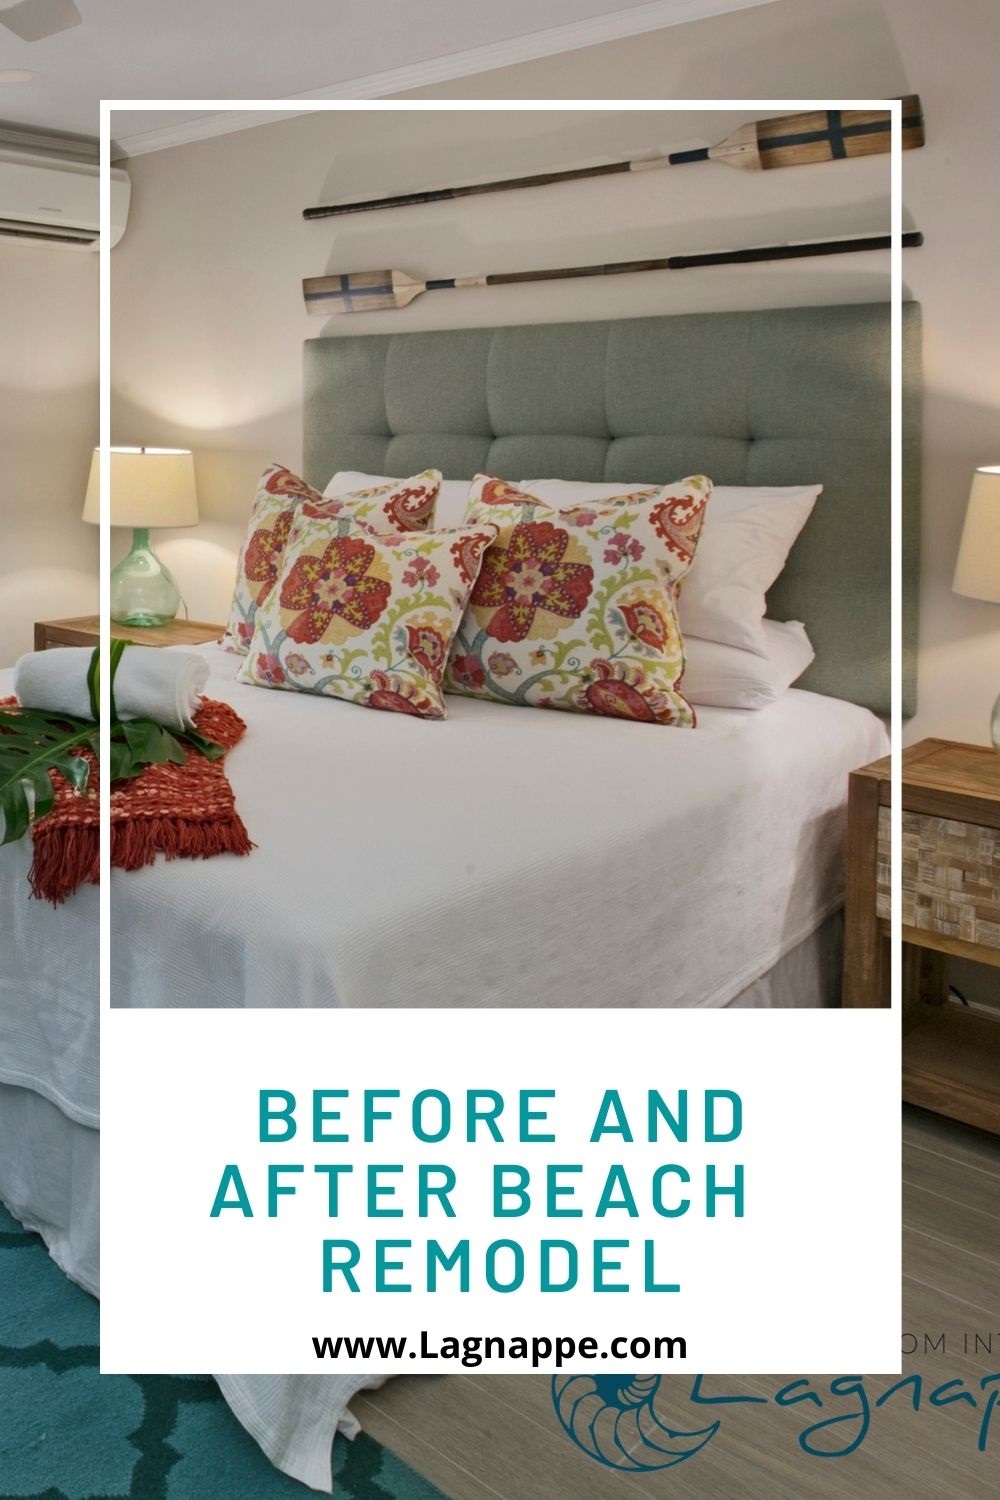 Before and After Beach Remodel